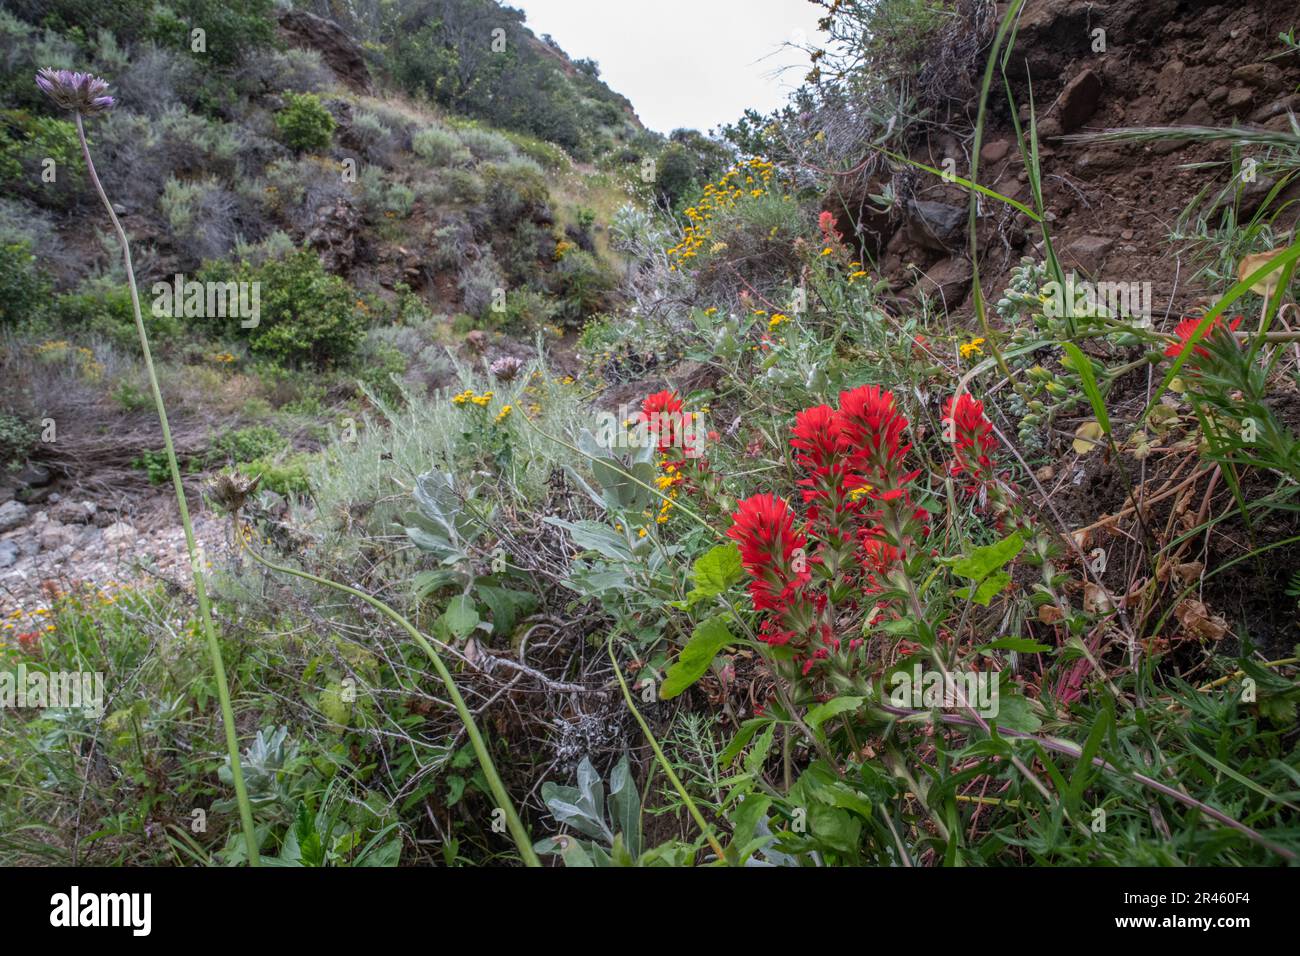 Coast Indian Paintbrush plant (Castilleja affinis) growing in a lush portion of Santa Cruz Island in the Channel Islands National Park, California. Stock Photo